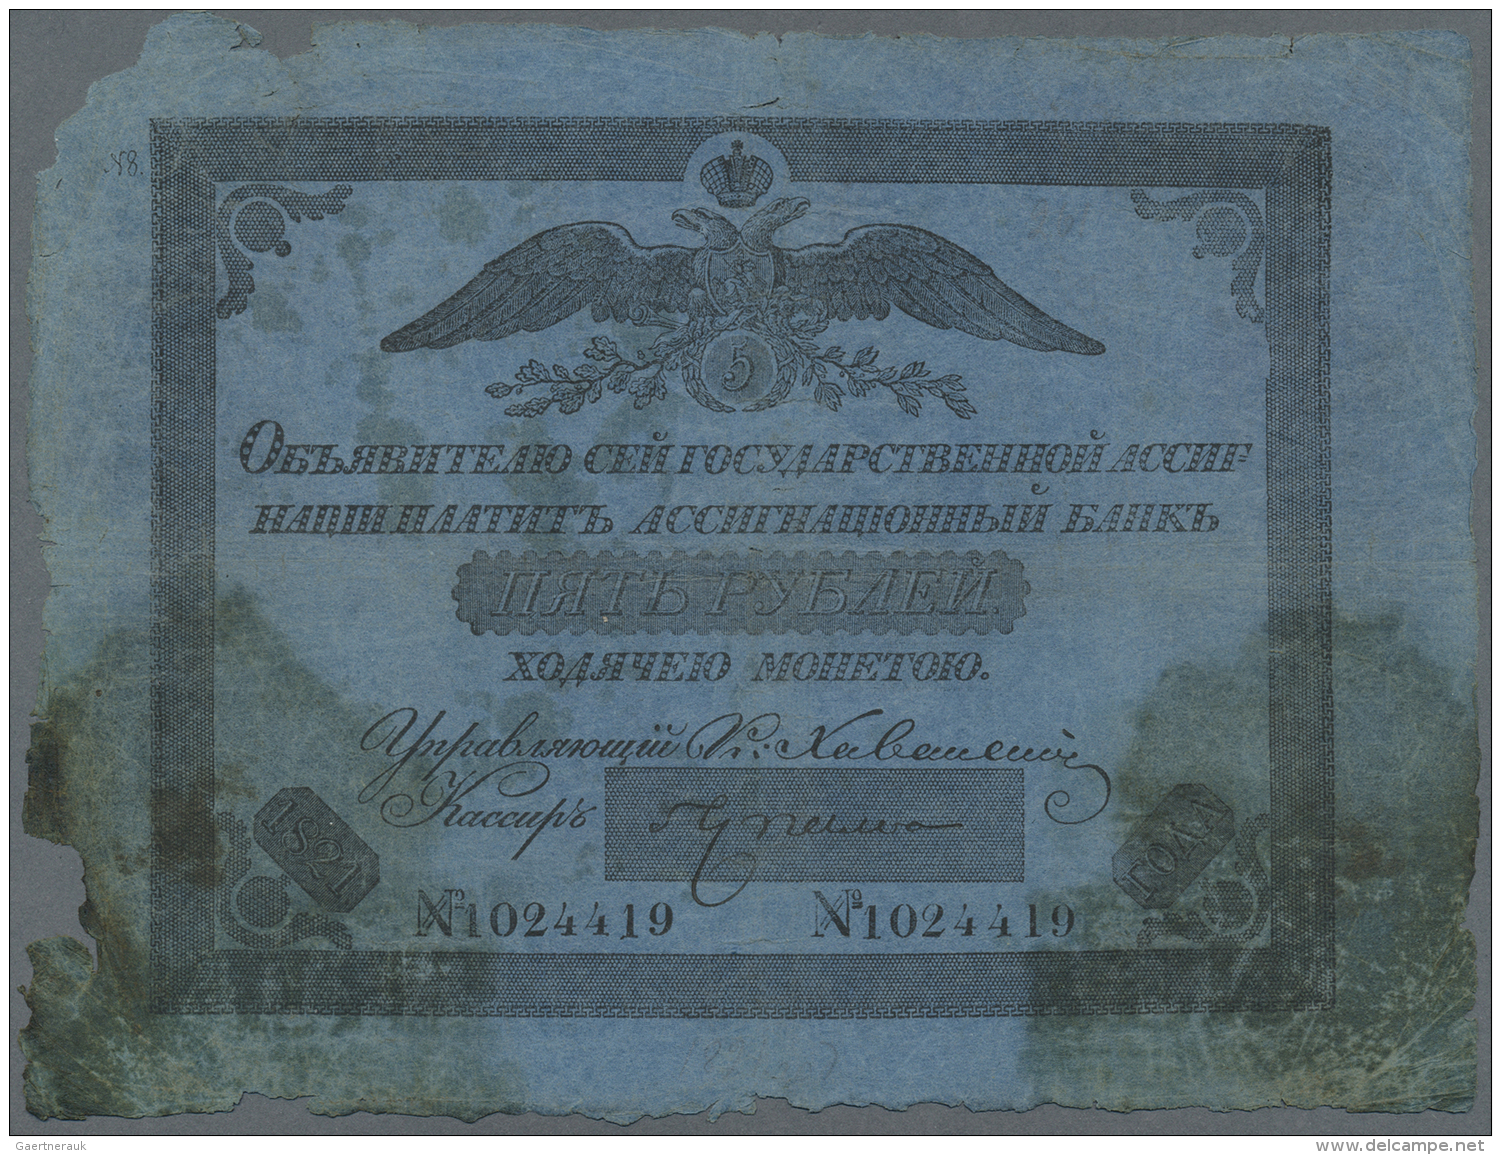 Russia / Russland: 5 Rubles 1821, P.A17extraorinary Rare Note In Well Worn Condition With Large Stains At Lower Left And - Russia